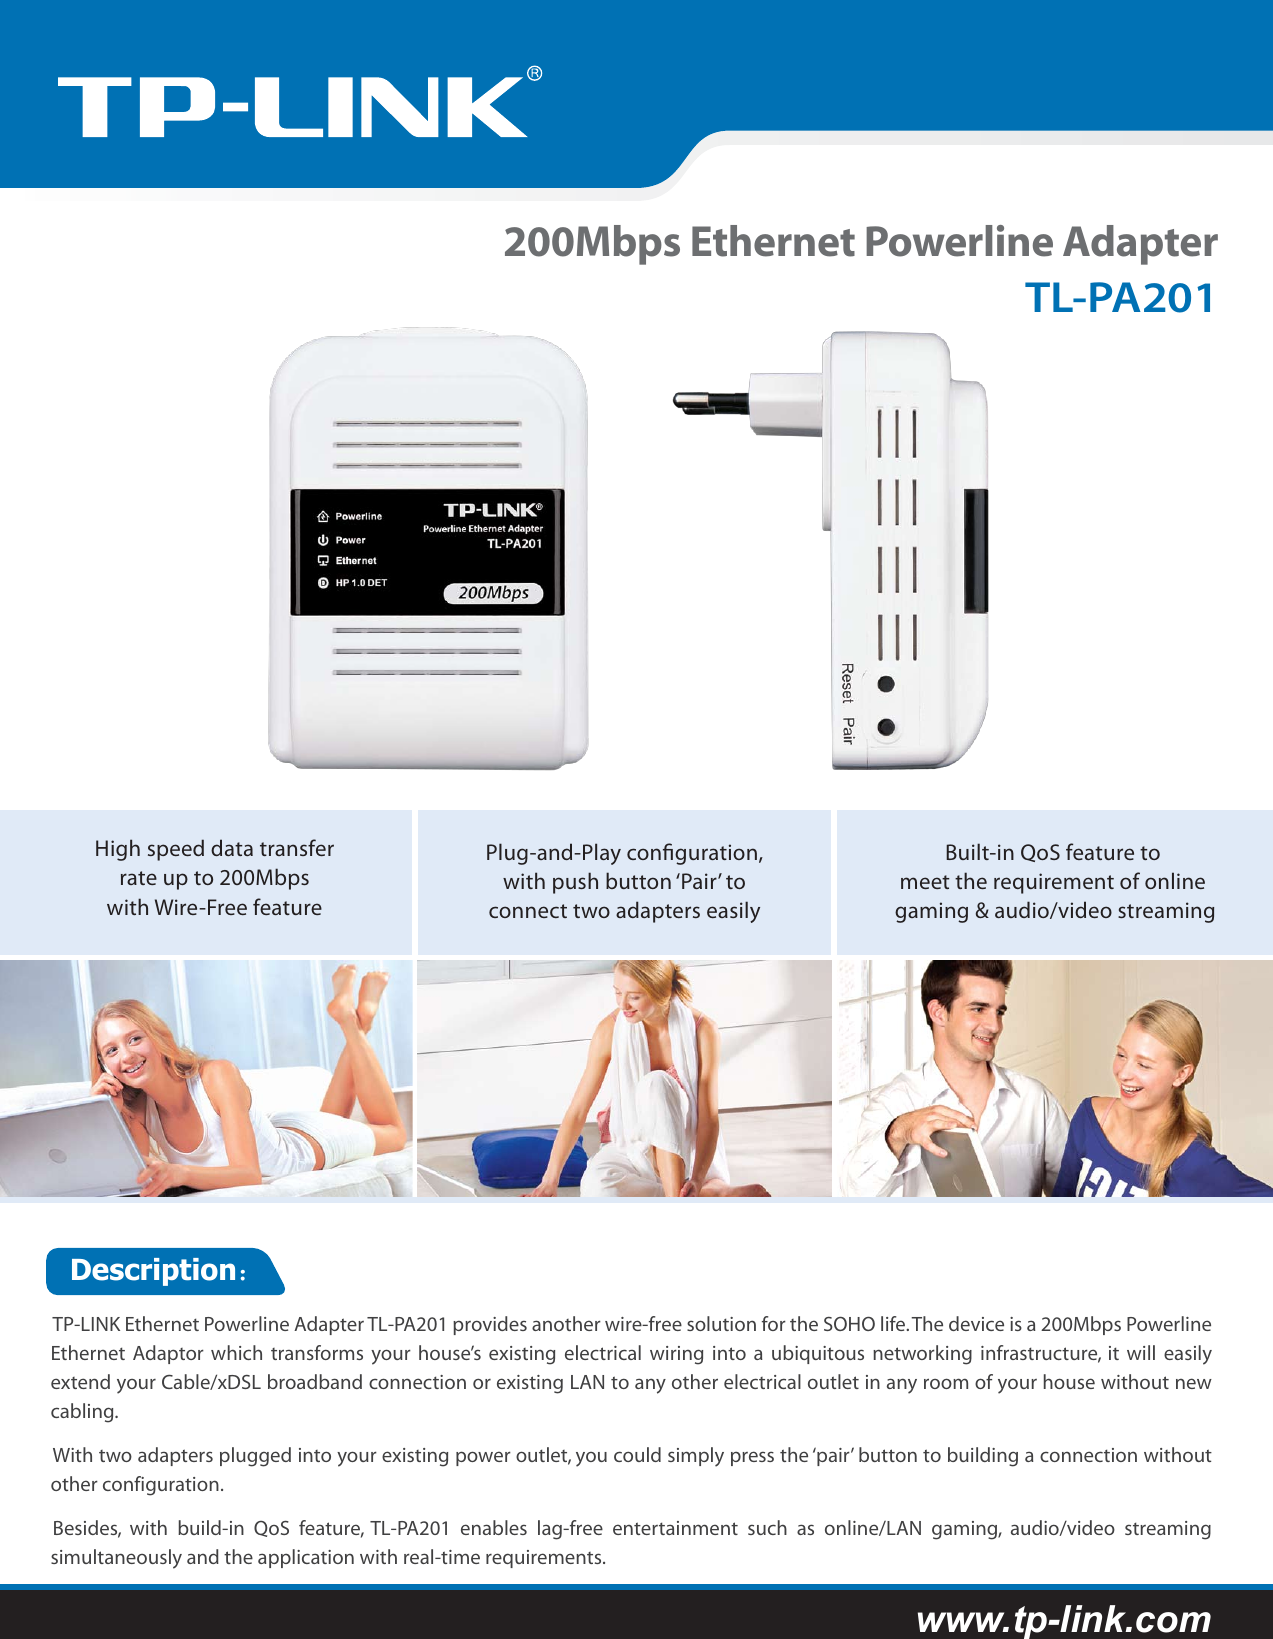 Page 1 of 2 - Tp-Link Tp-Link-200Mbps-Ethernet-Powerline-Adapter-Tl-Pa201-Users-Manual- TL-PA201-1  Tp-link-200mbps-ethernet-powerline-adapter-tl-pa201-users-manual